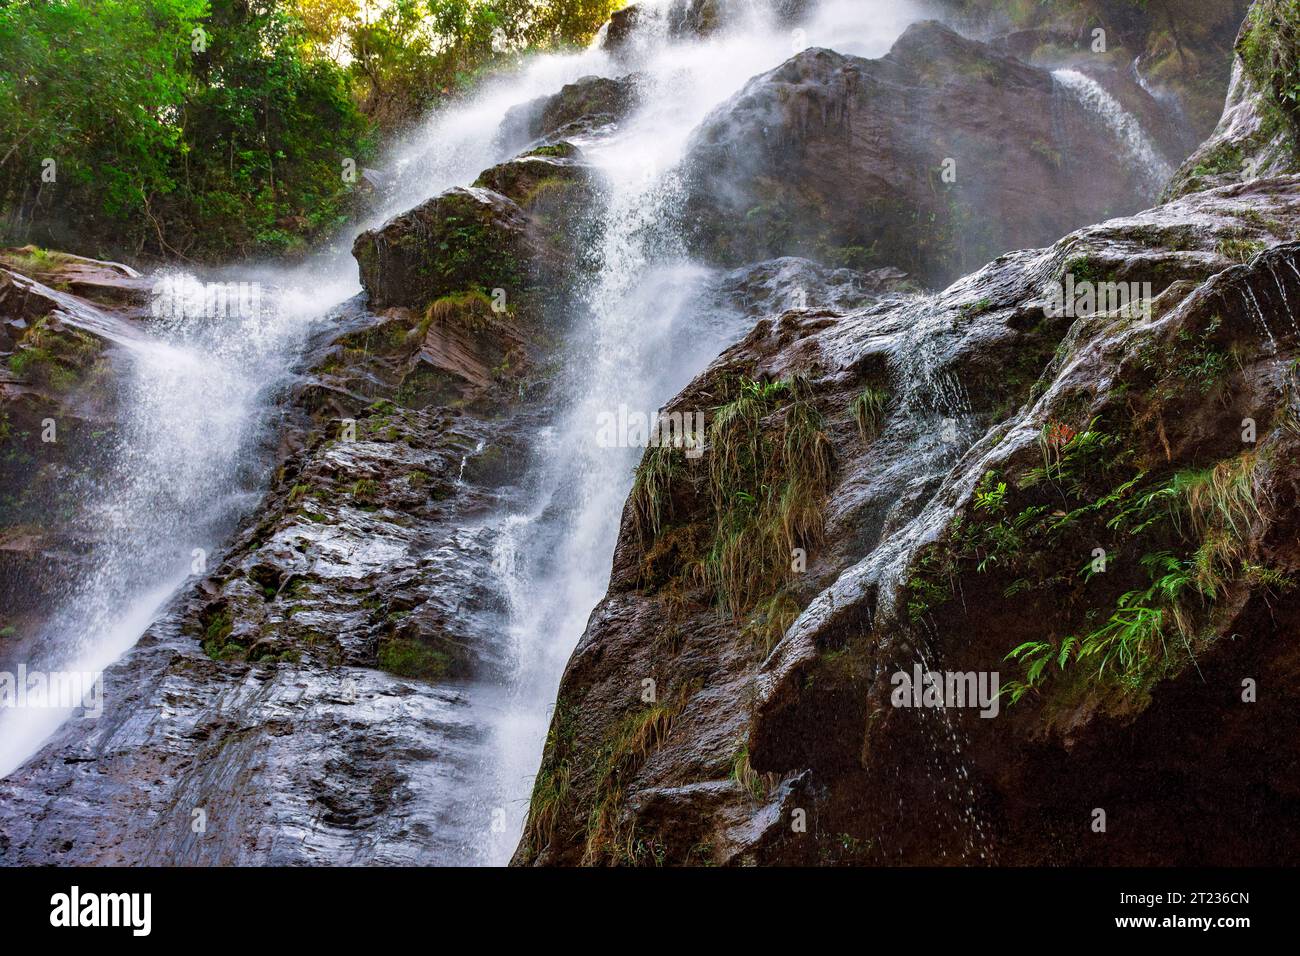 Stunning waterfal through the rocks and forest in Minas Gerais, Brazil Stock Photo